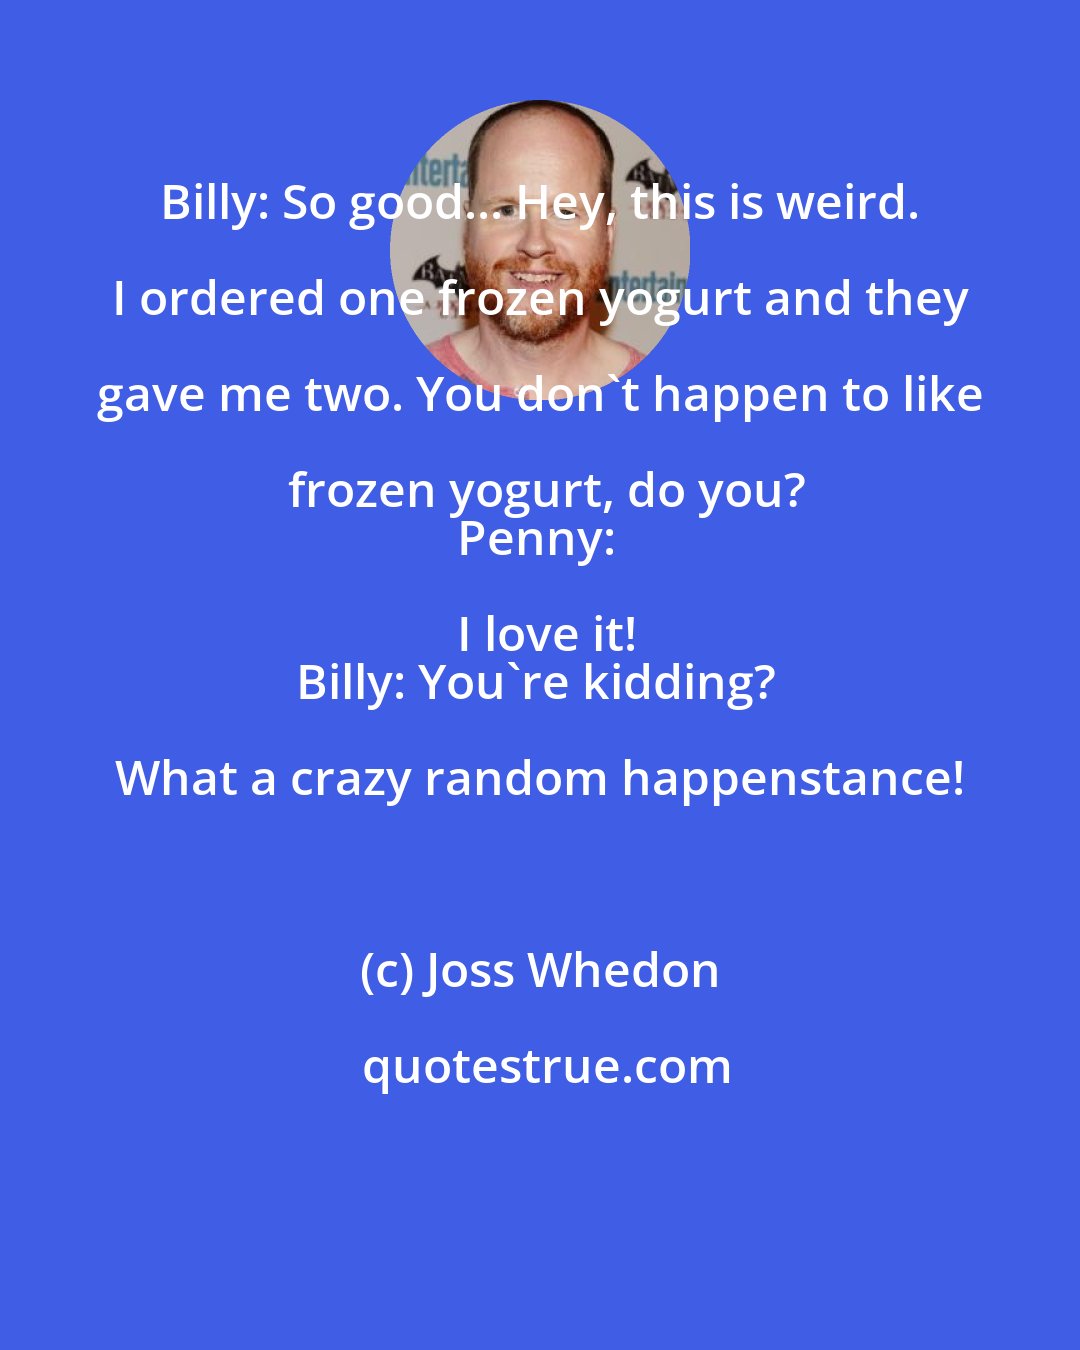 Joss Whedon: Billy: So good... Hey, this is weird. I ordered one frozen yogurt and they gave me two. You don't happen to like frozen yogurt, do you?
Penny: I love it!
Billy: You're kidding? What a crazy random happenstance!